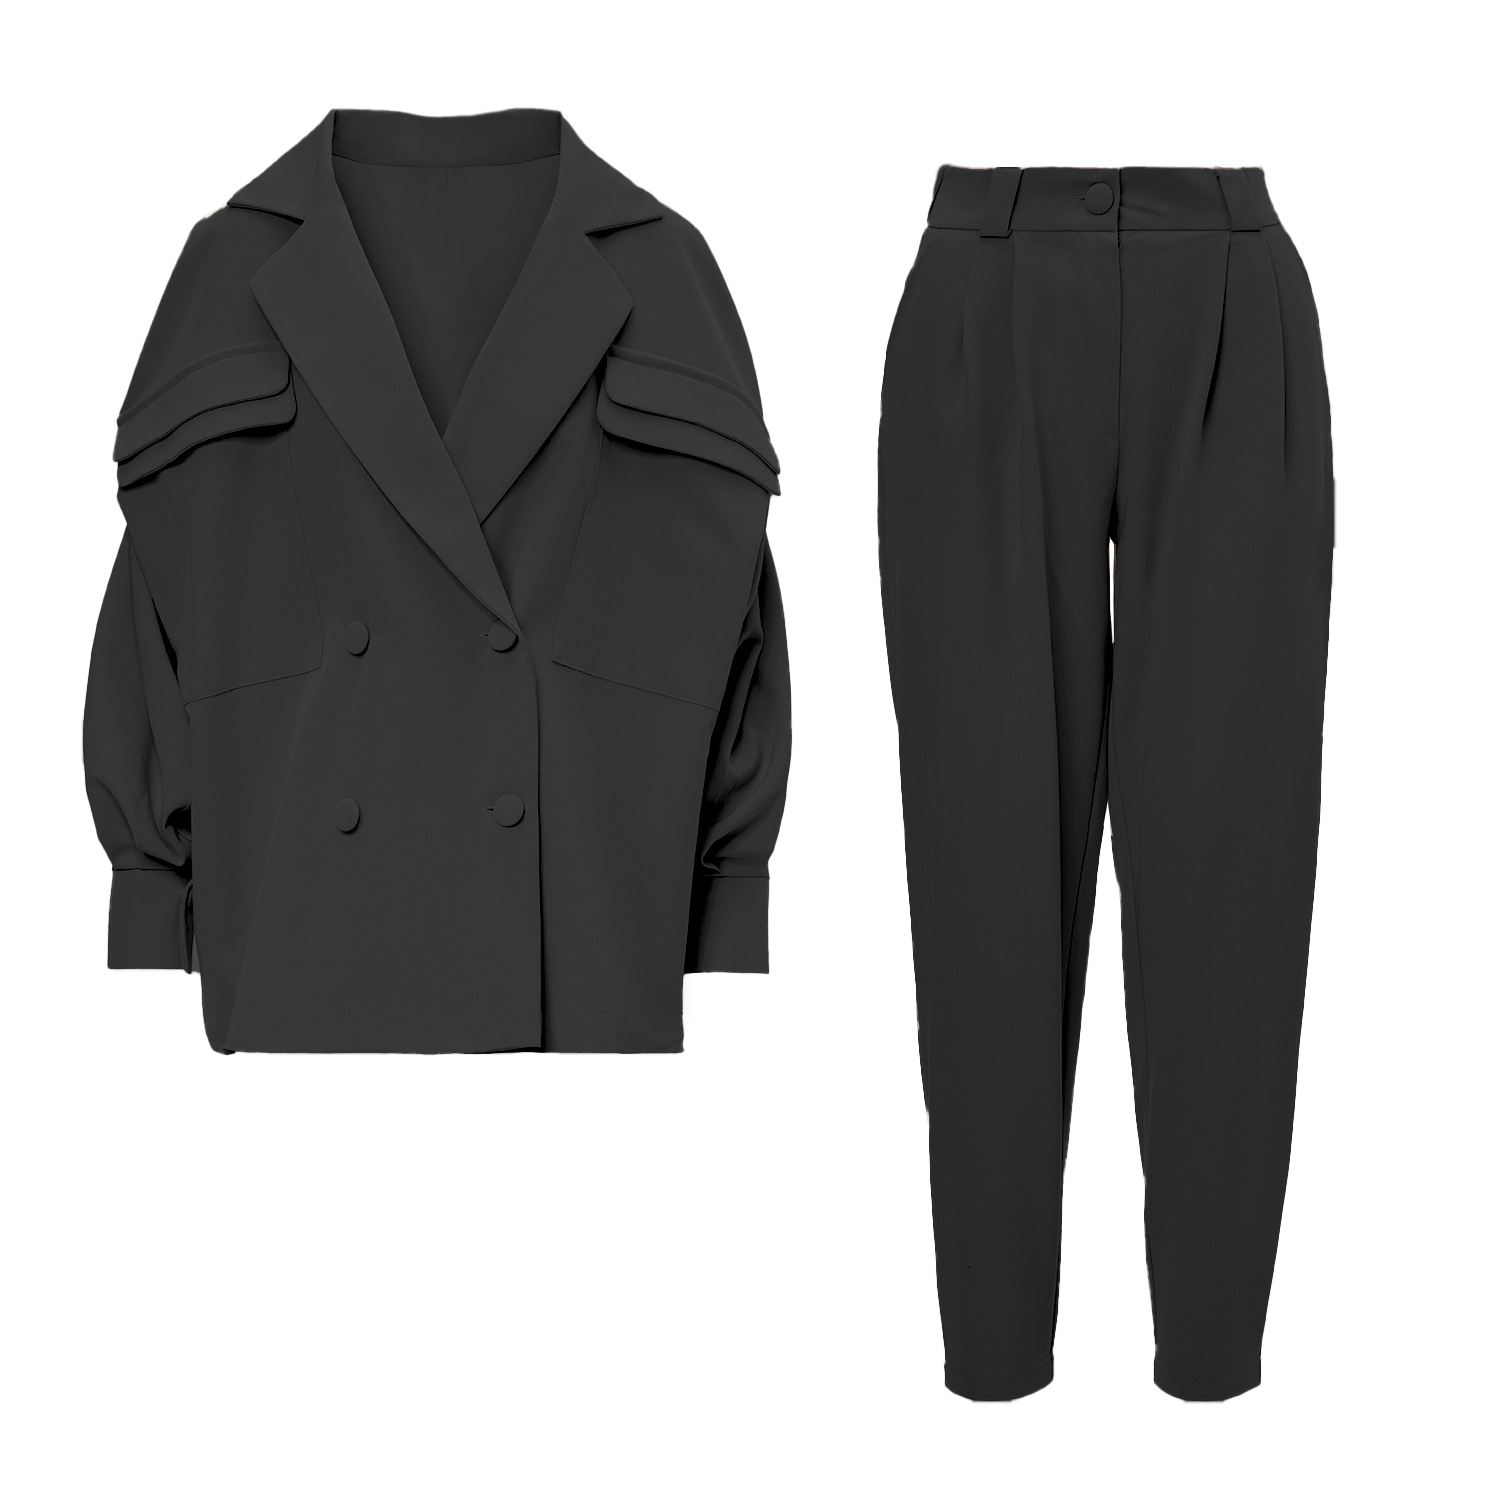 Women’s Black Suit With Oversized Blazer And High-Waist Slim Fit Trousers Extra Small Bluzat